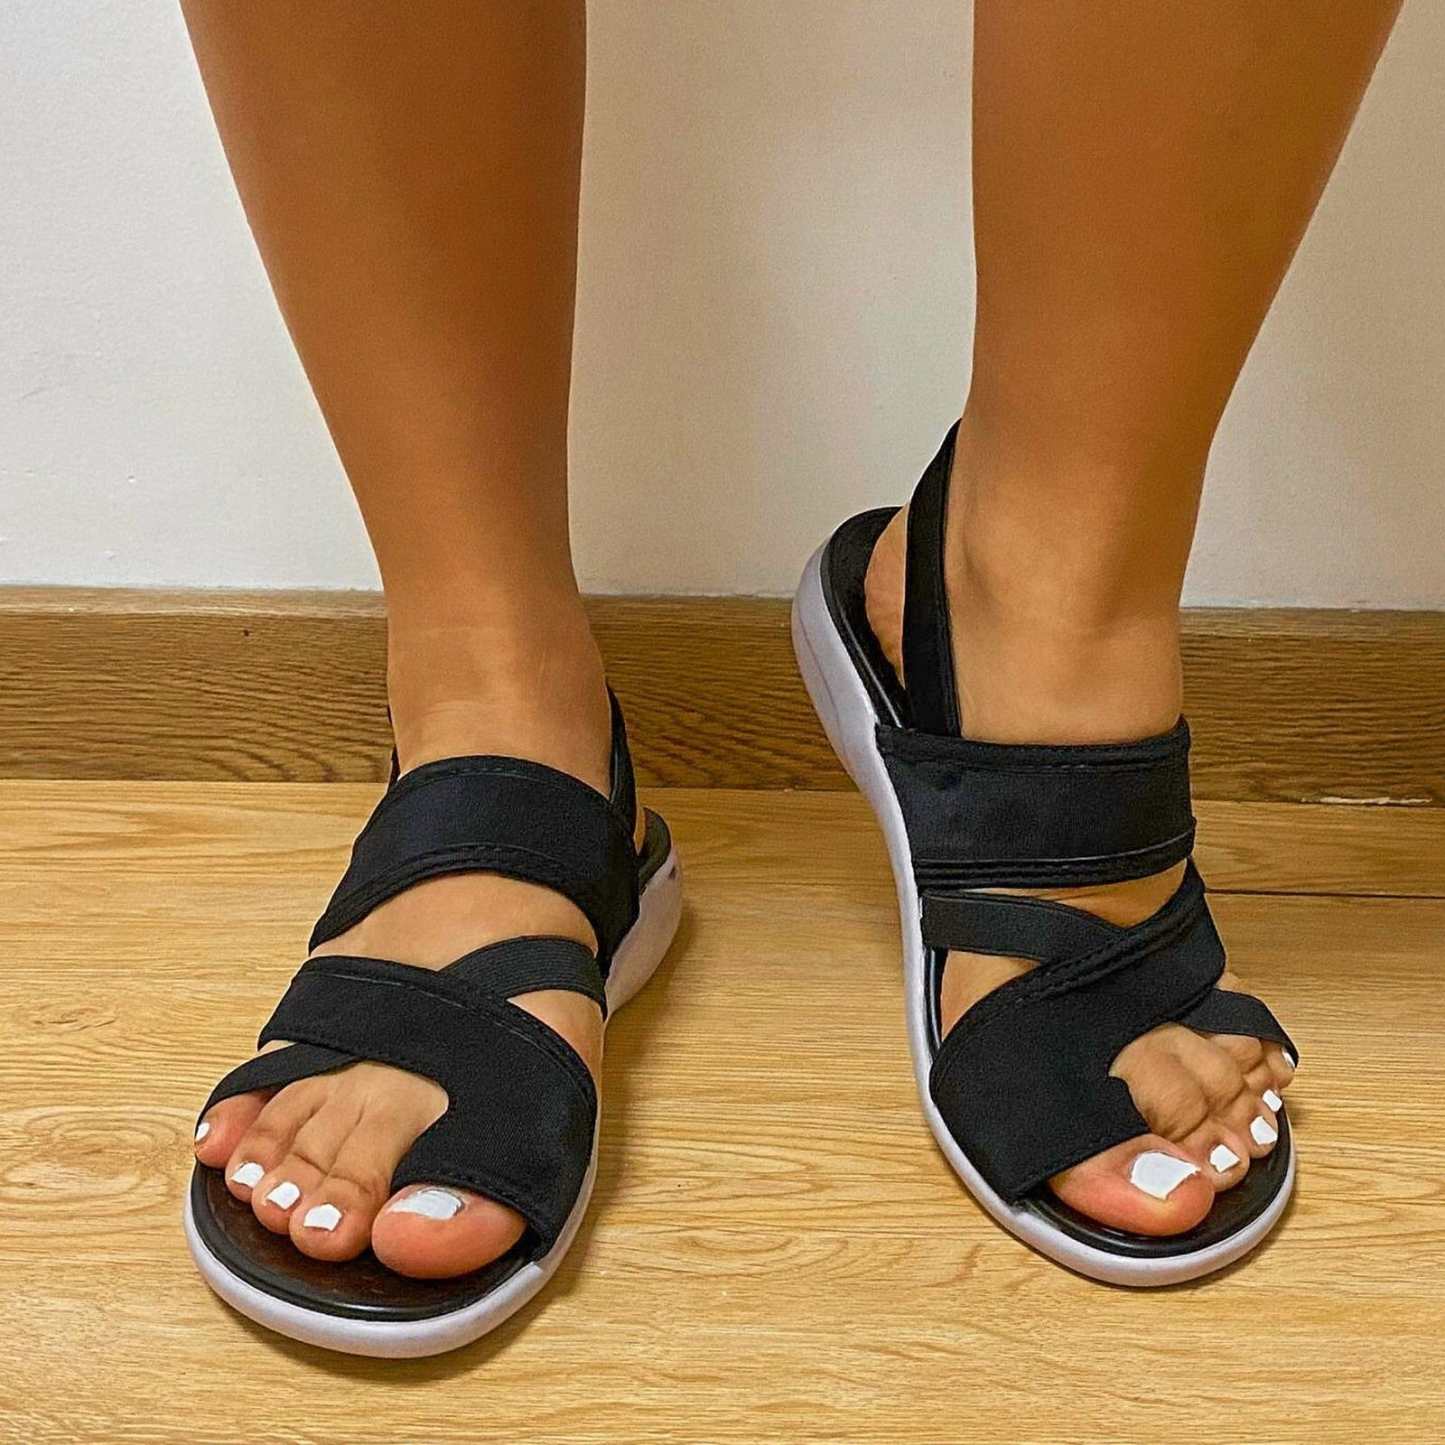 Comfy Summer Sandals for Bunions - Toe Correction Sandals